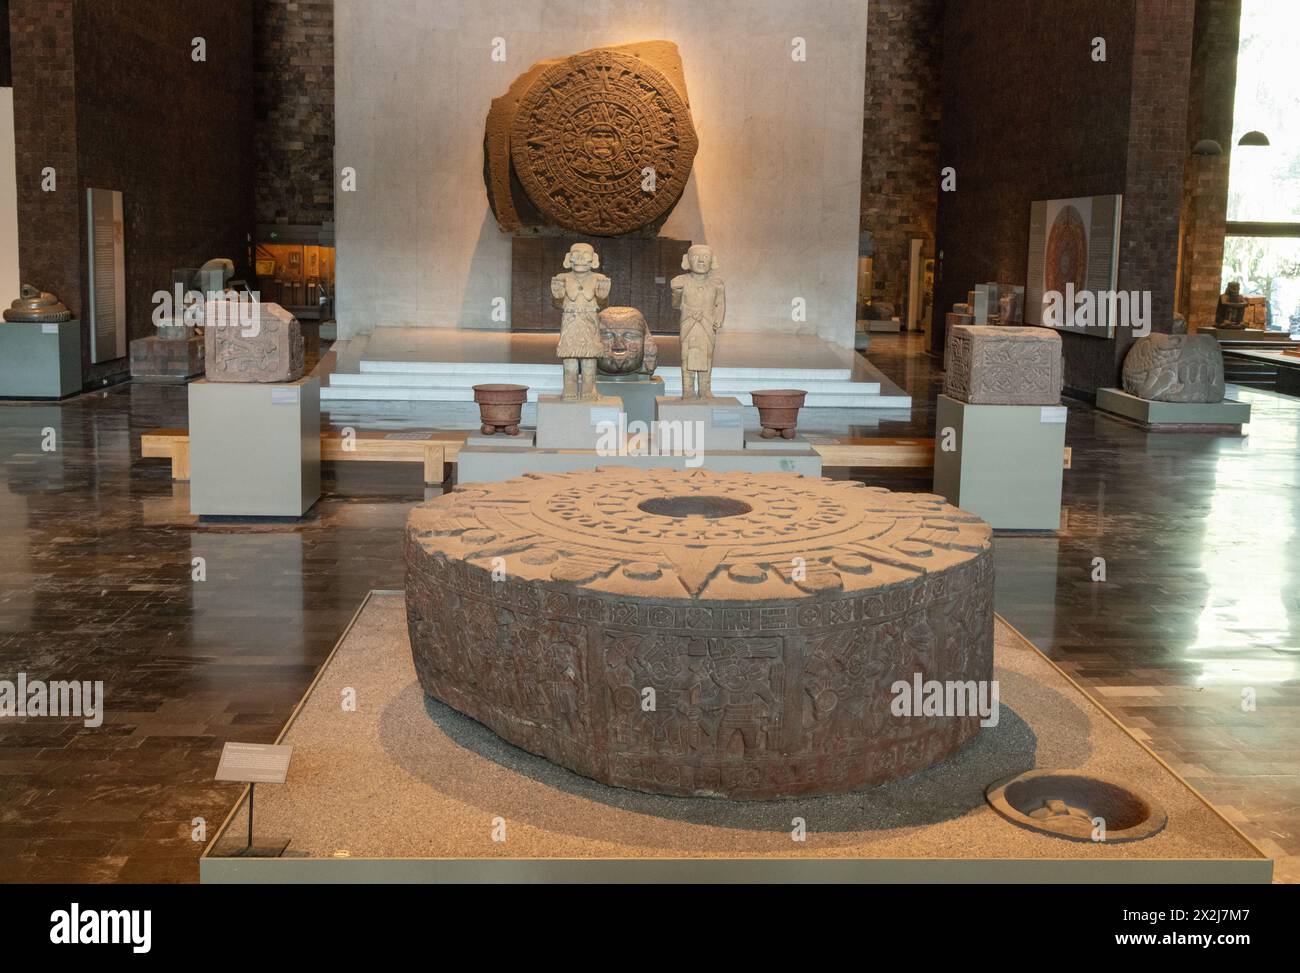 Exhibits in the National Museum of Anthropology, Mexico - interior view including the Aztec Stone of the Sun mounted on the wall; Mexico City, Mexico Stock Photo